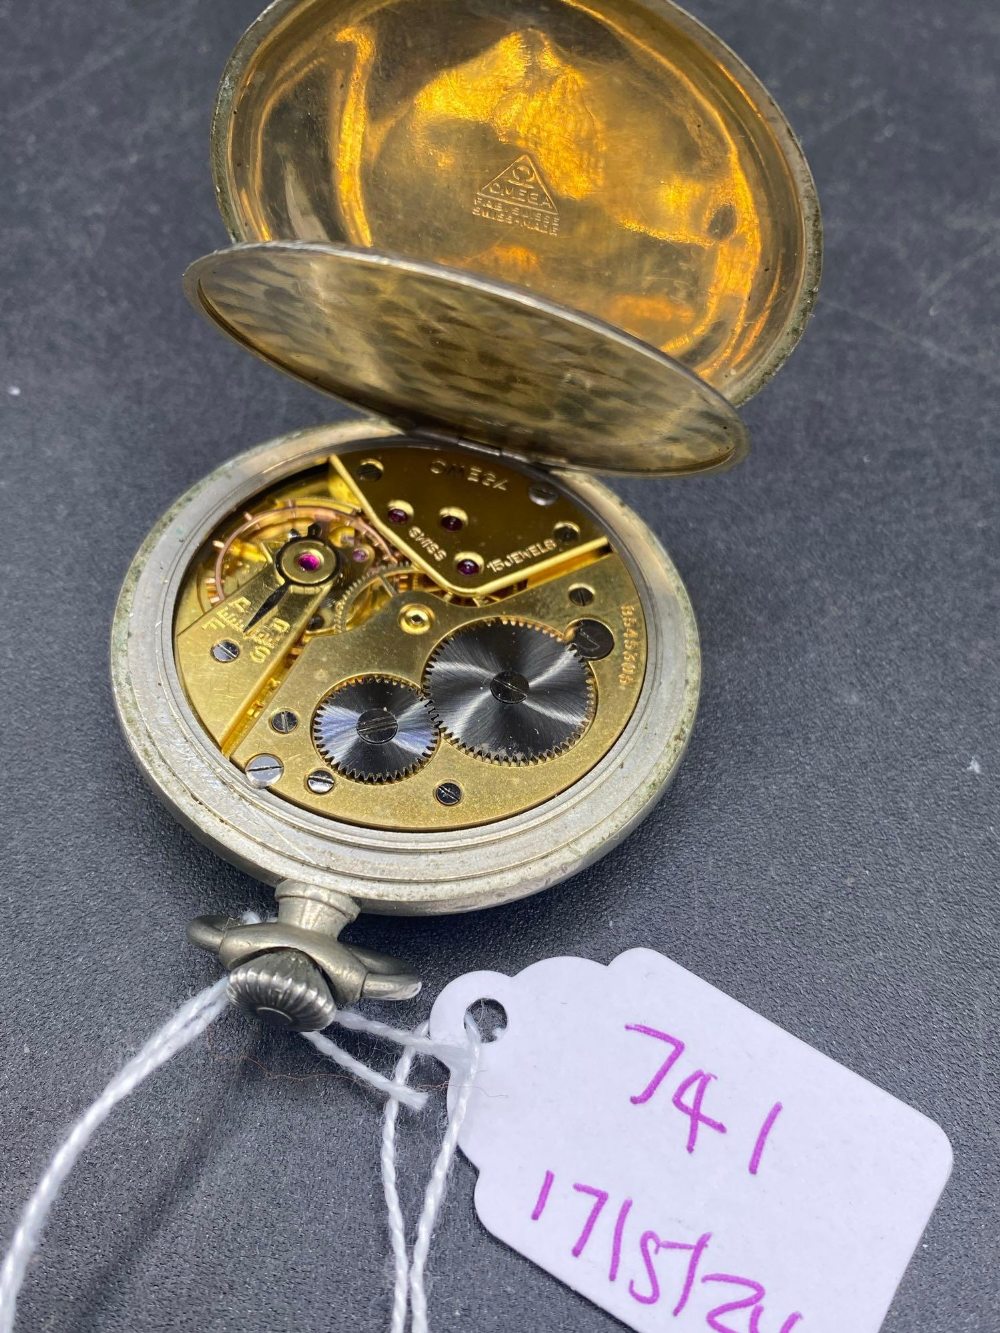 A metal cased OMEGA pocket watch with seconds dial - Image 2 of 2